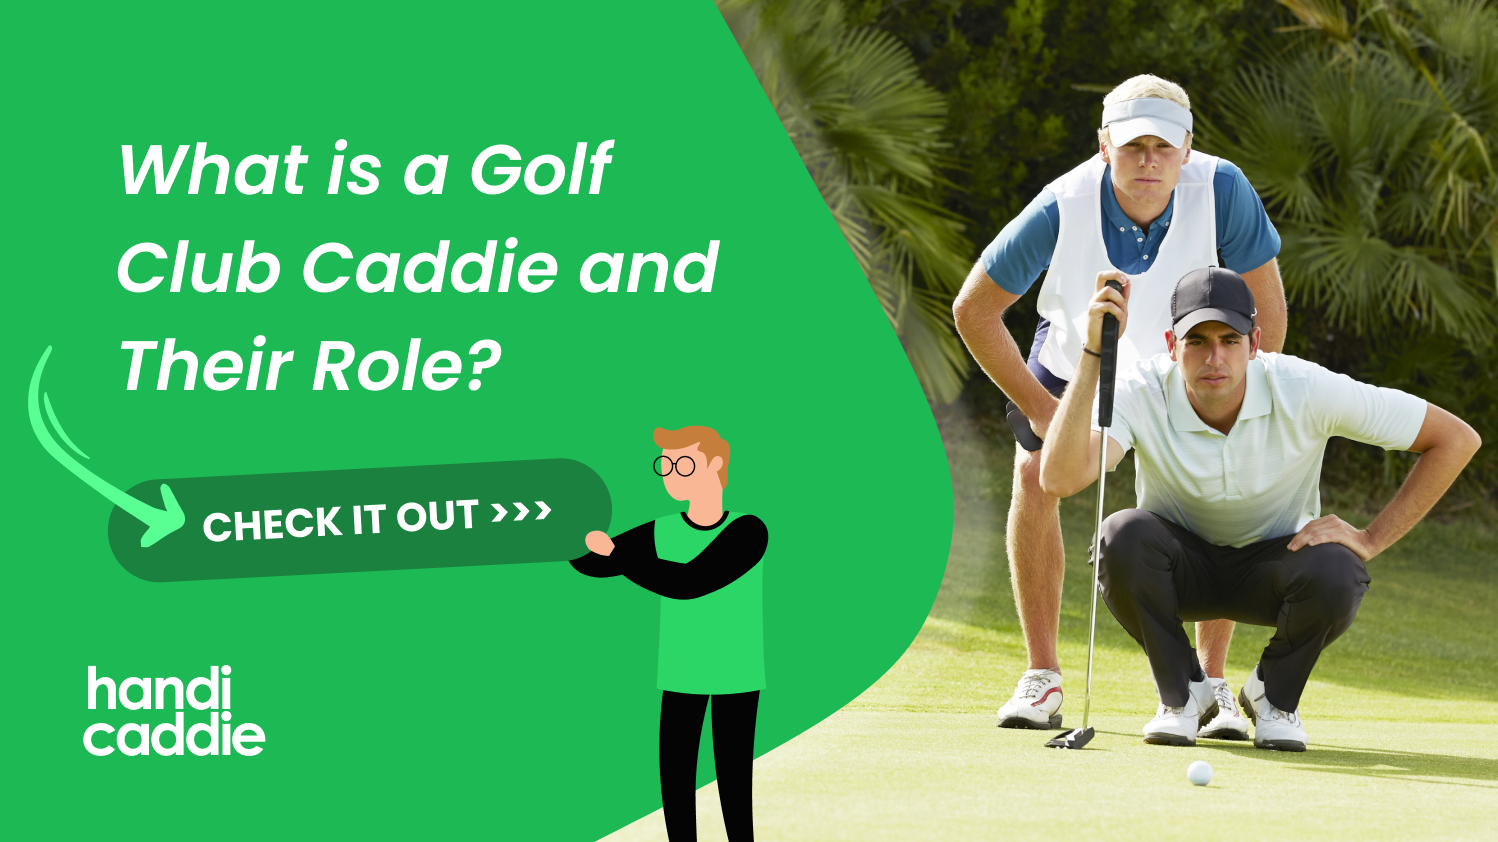 What is a Golf Club Caddie and Their Role?